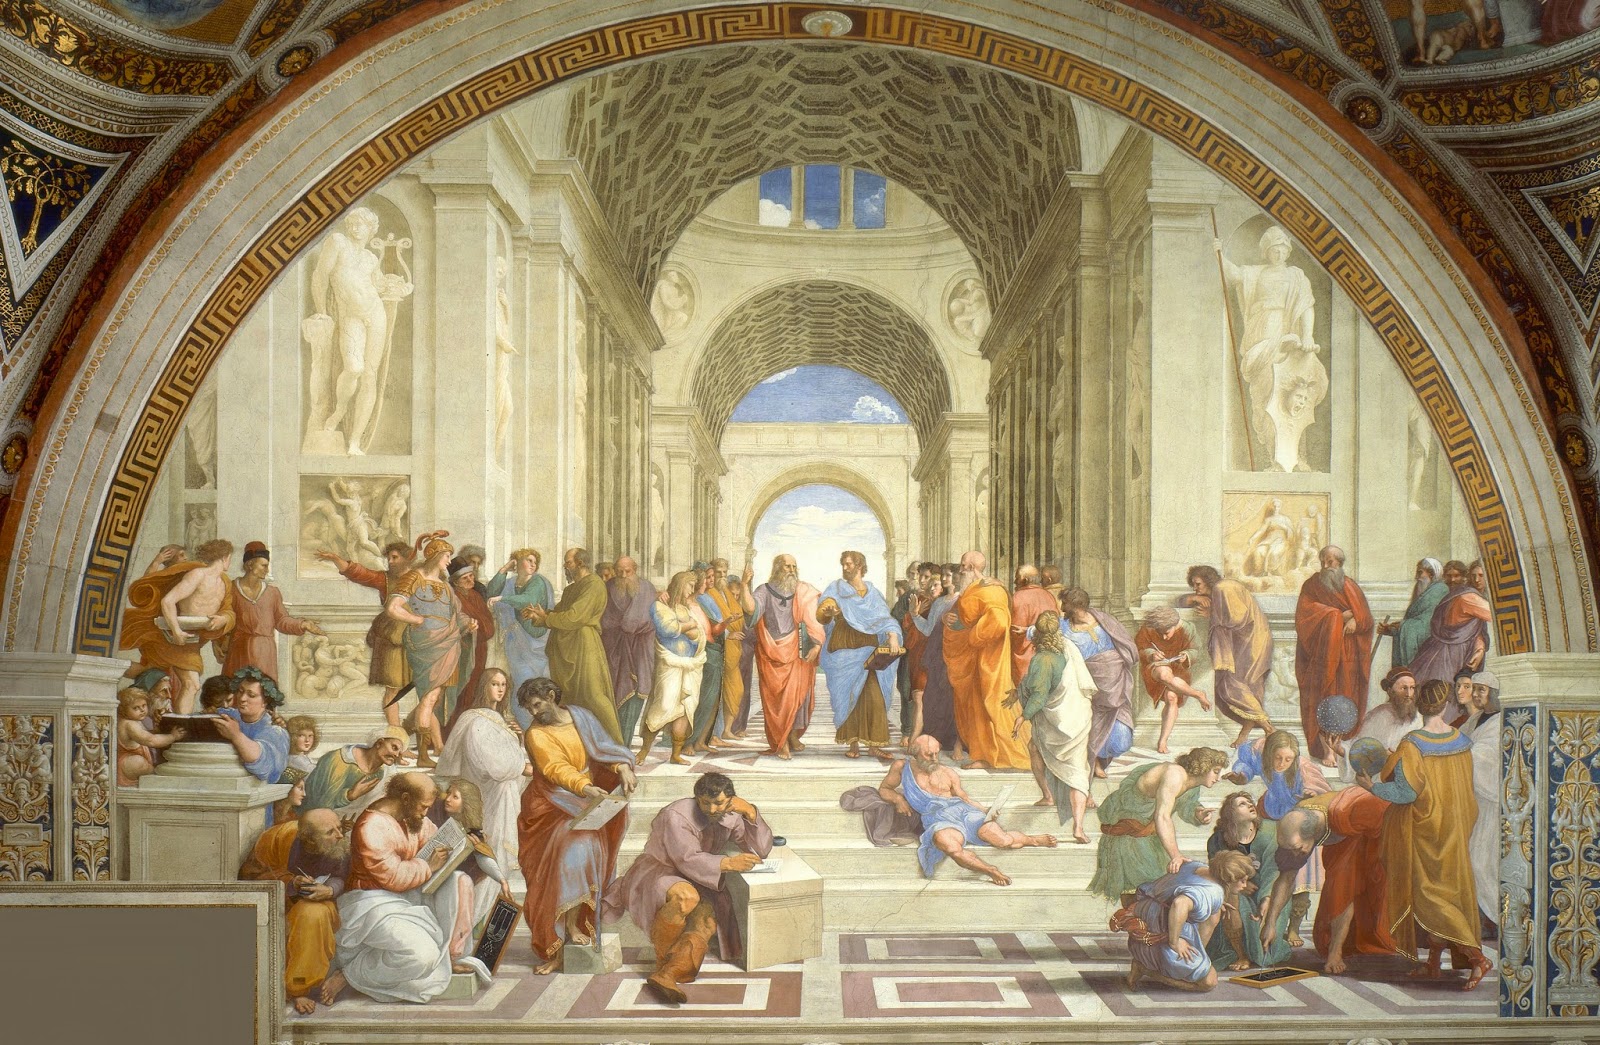 Raphael's School of Athens - The Key To Happiness, According To 3 Greek Philosophers